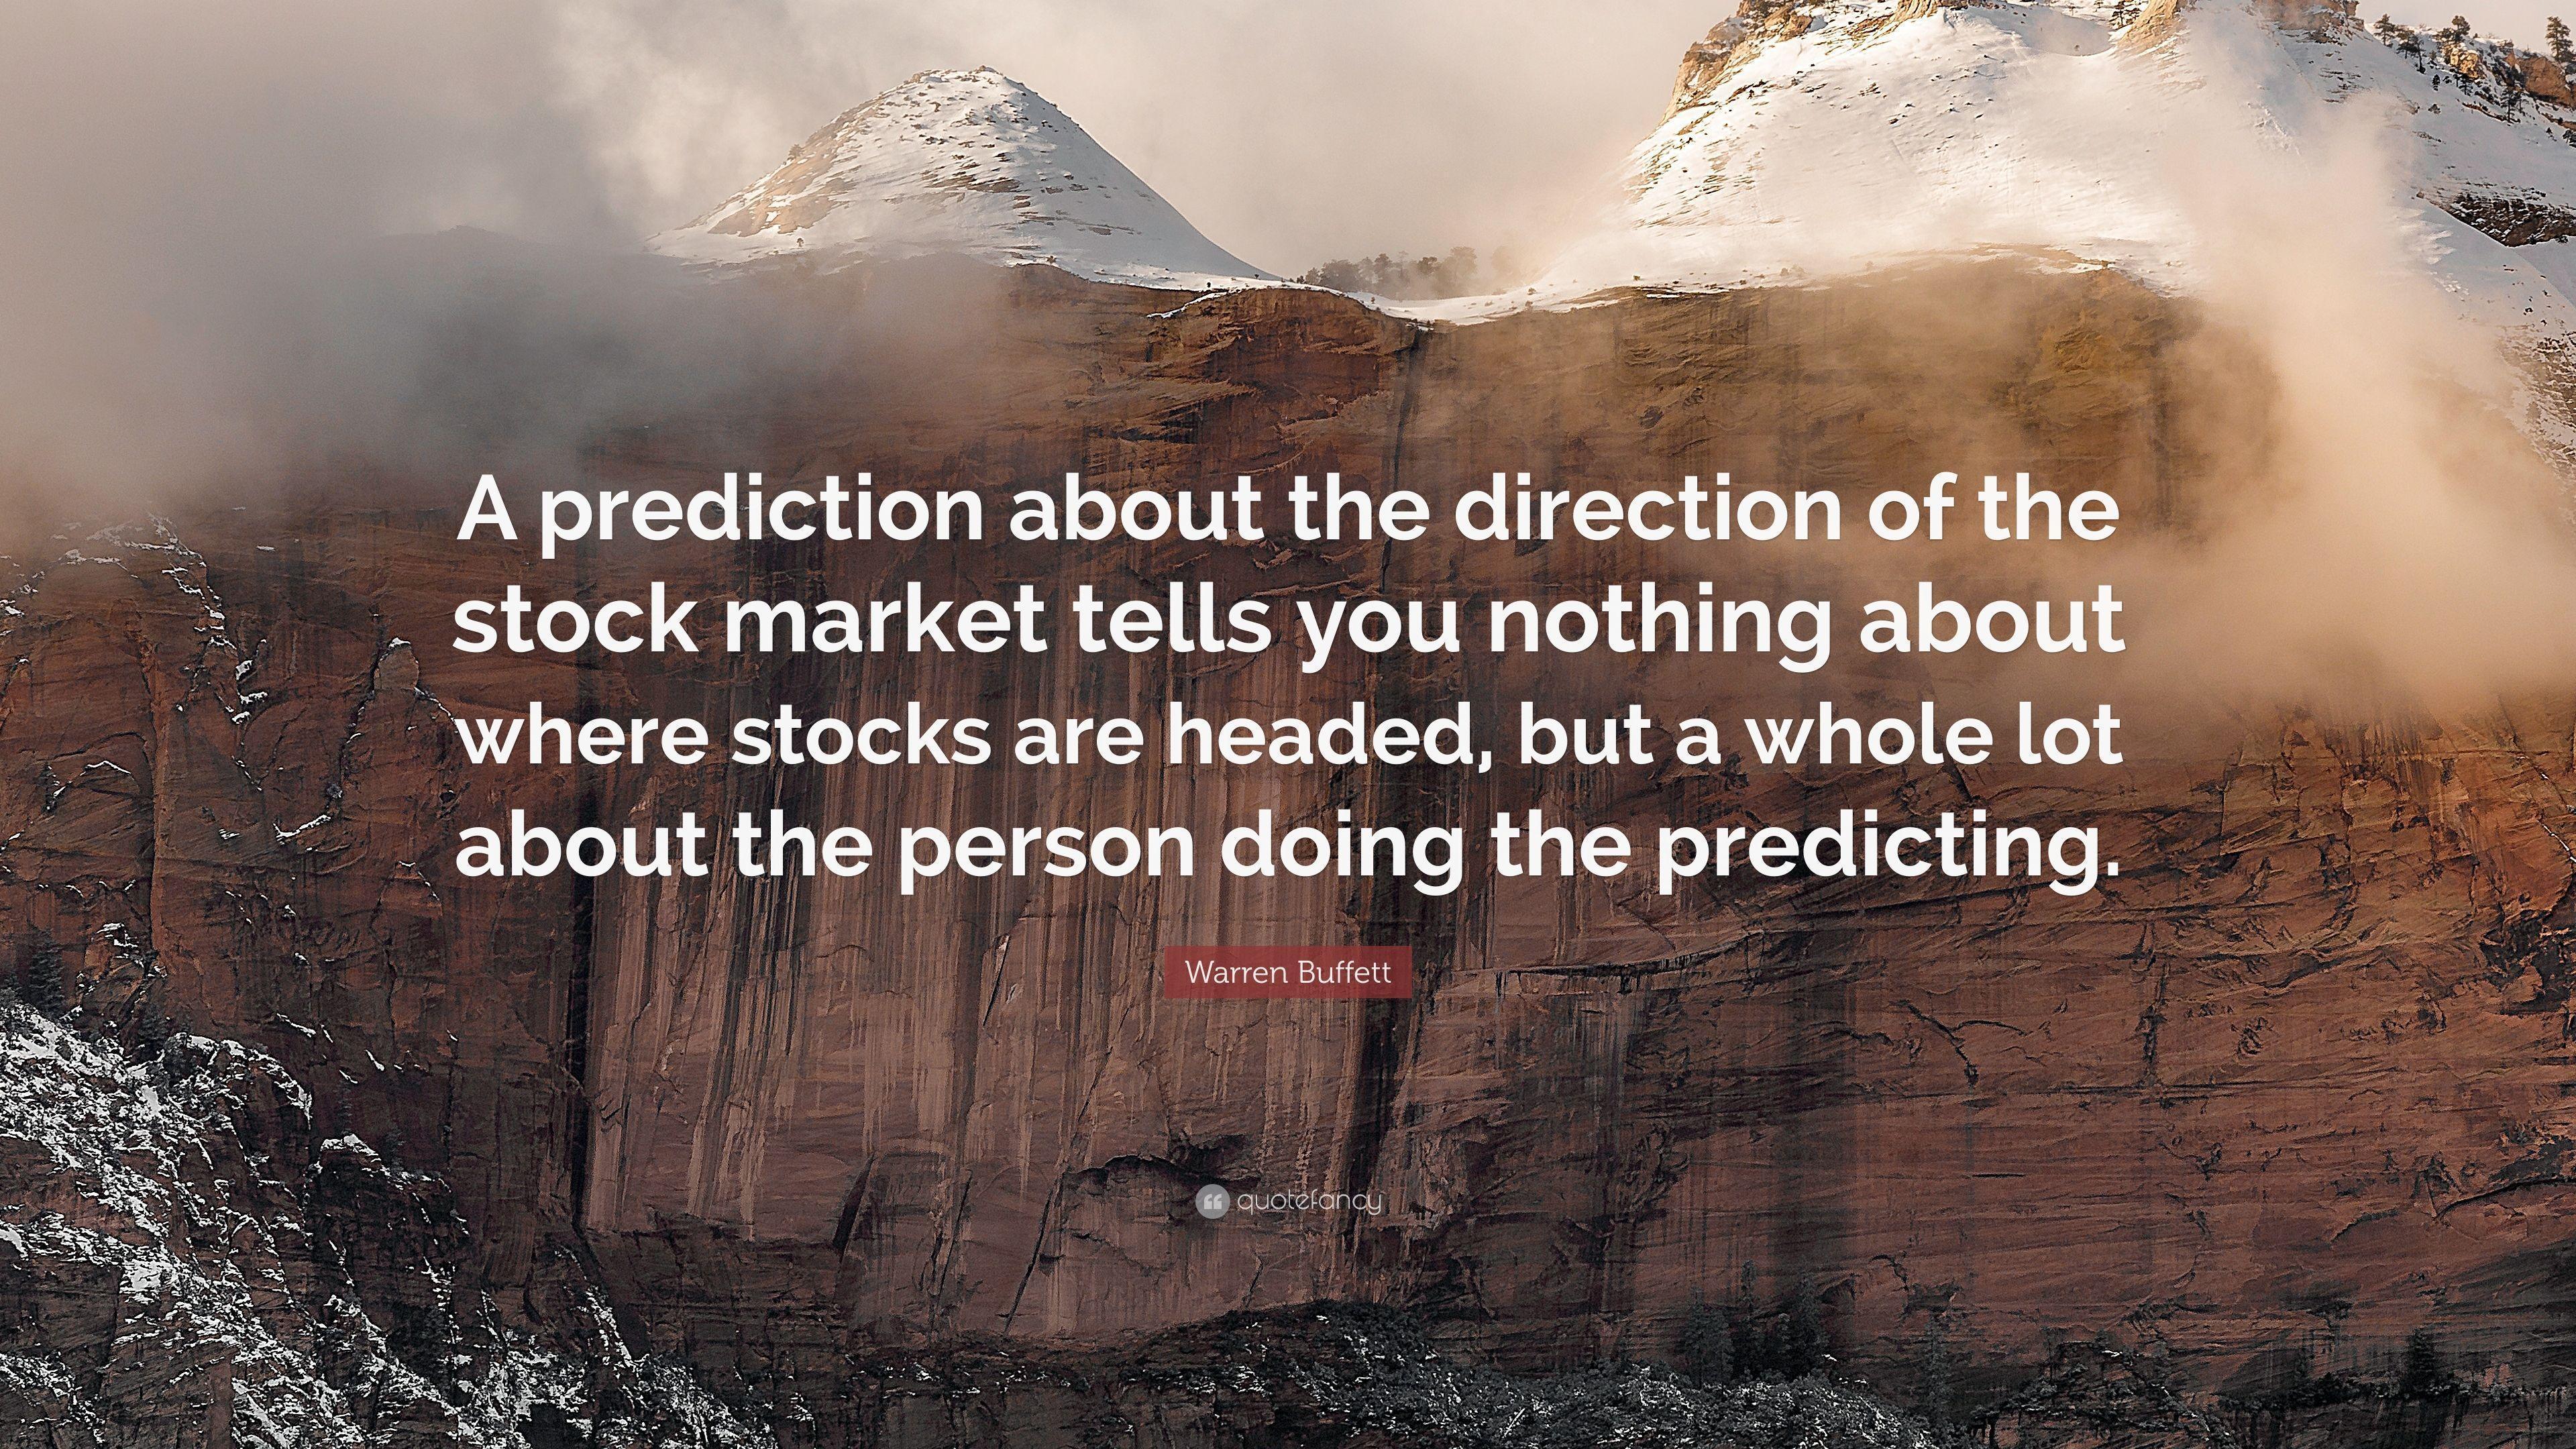 Warren Buffett Quote: “A prediction about the direction